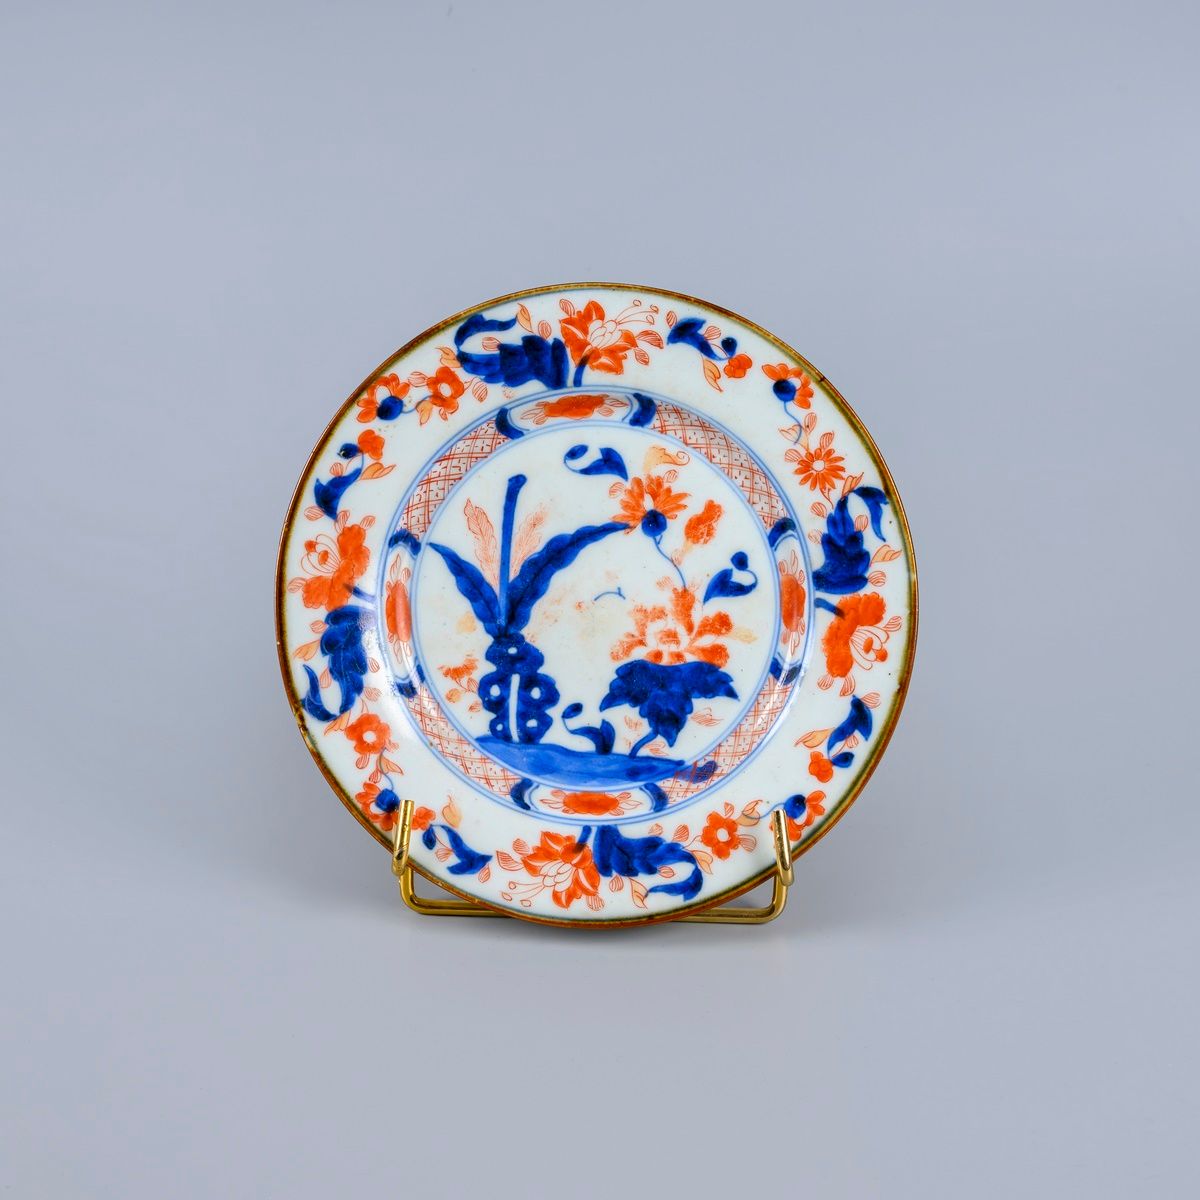 Null imari plate with red and blue floral decoration

D: 21 cm

wears